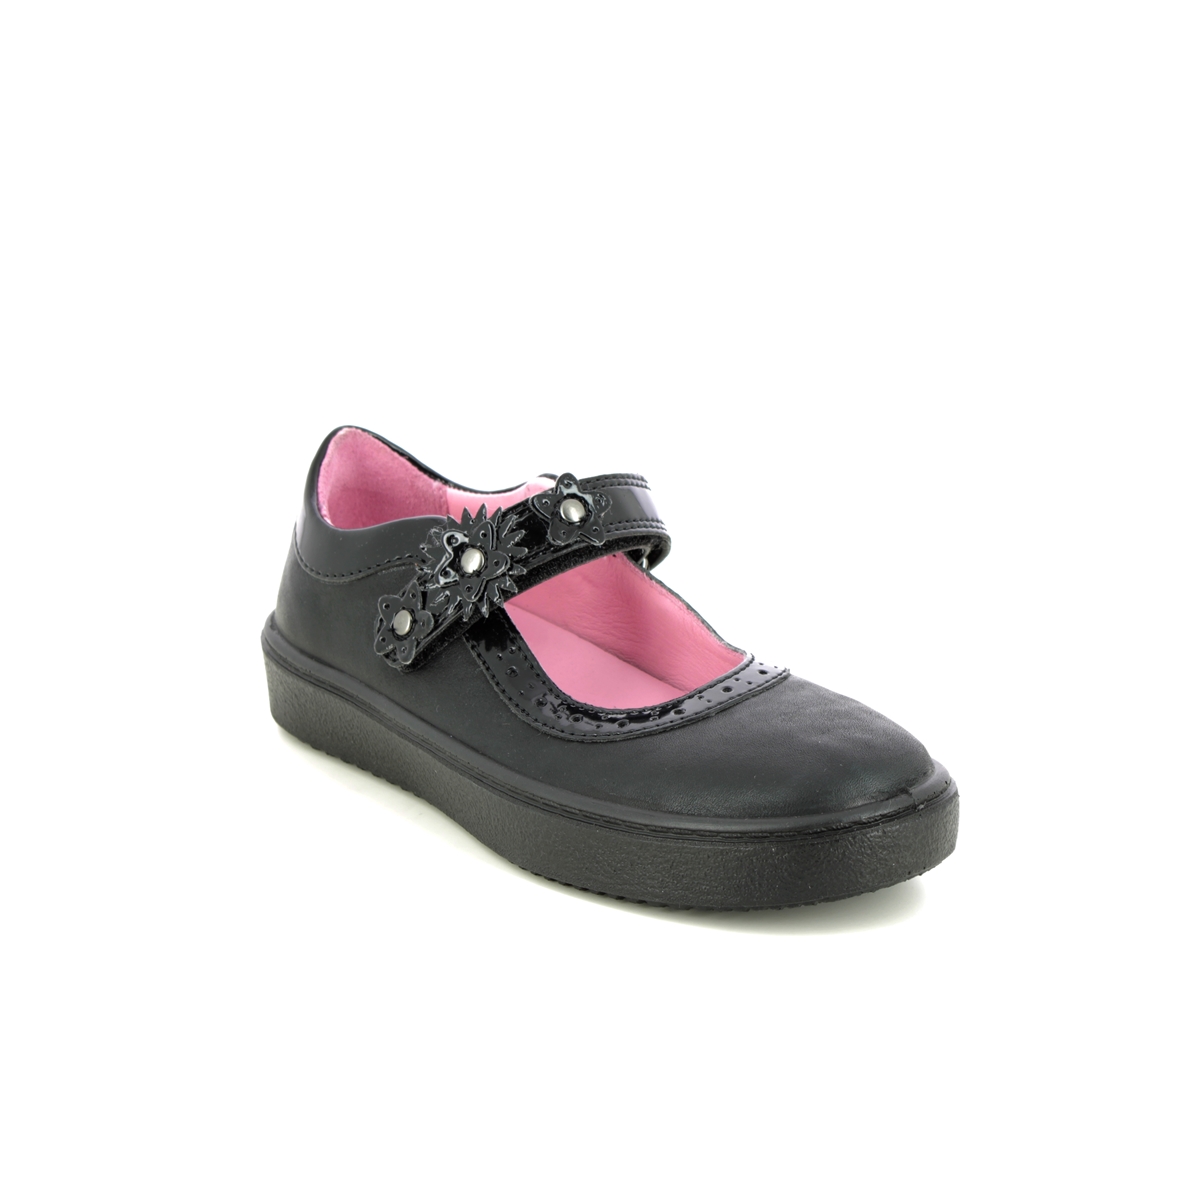 Superfit Heaven Mary Jane Black Leather Kids Girls Shoes 1006491-0000 In Size 31 In Plain Black Leather For School For kids